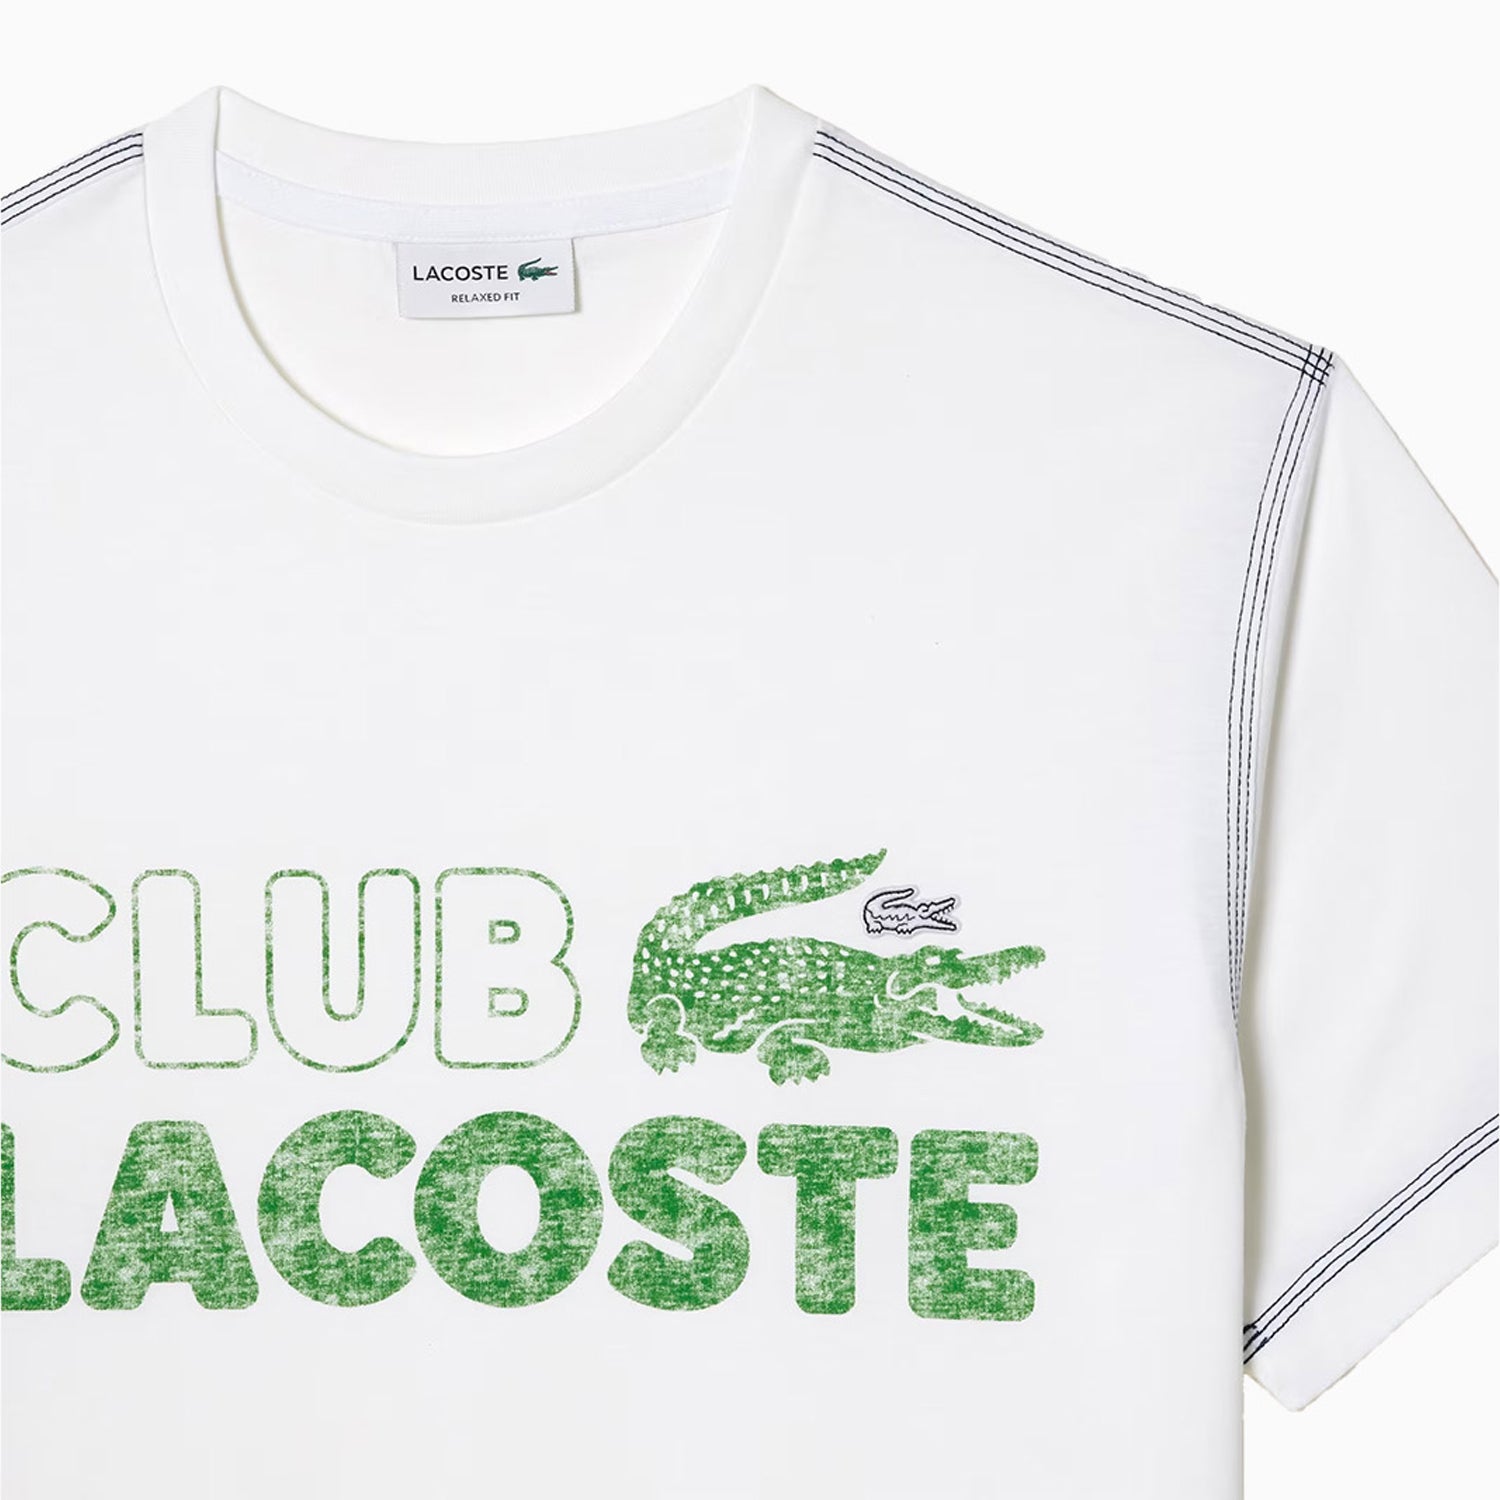 lacoste-mens-club-letters-outfit-th5440-001-gh5638-001